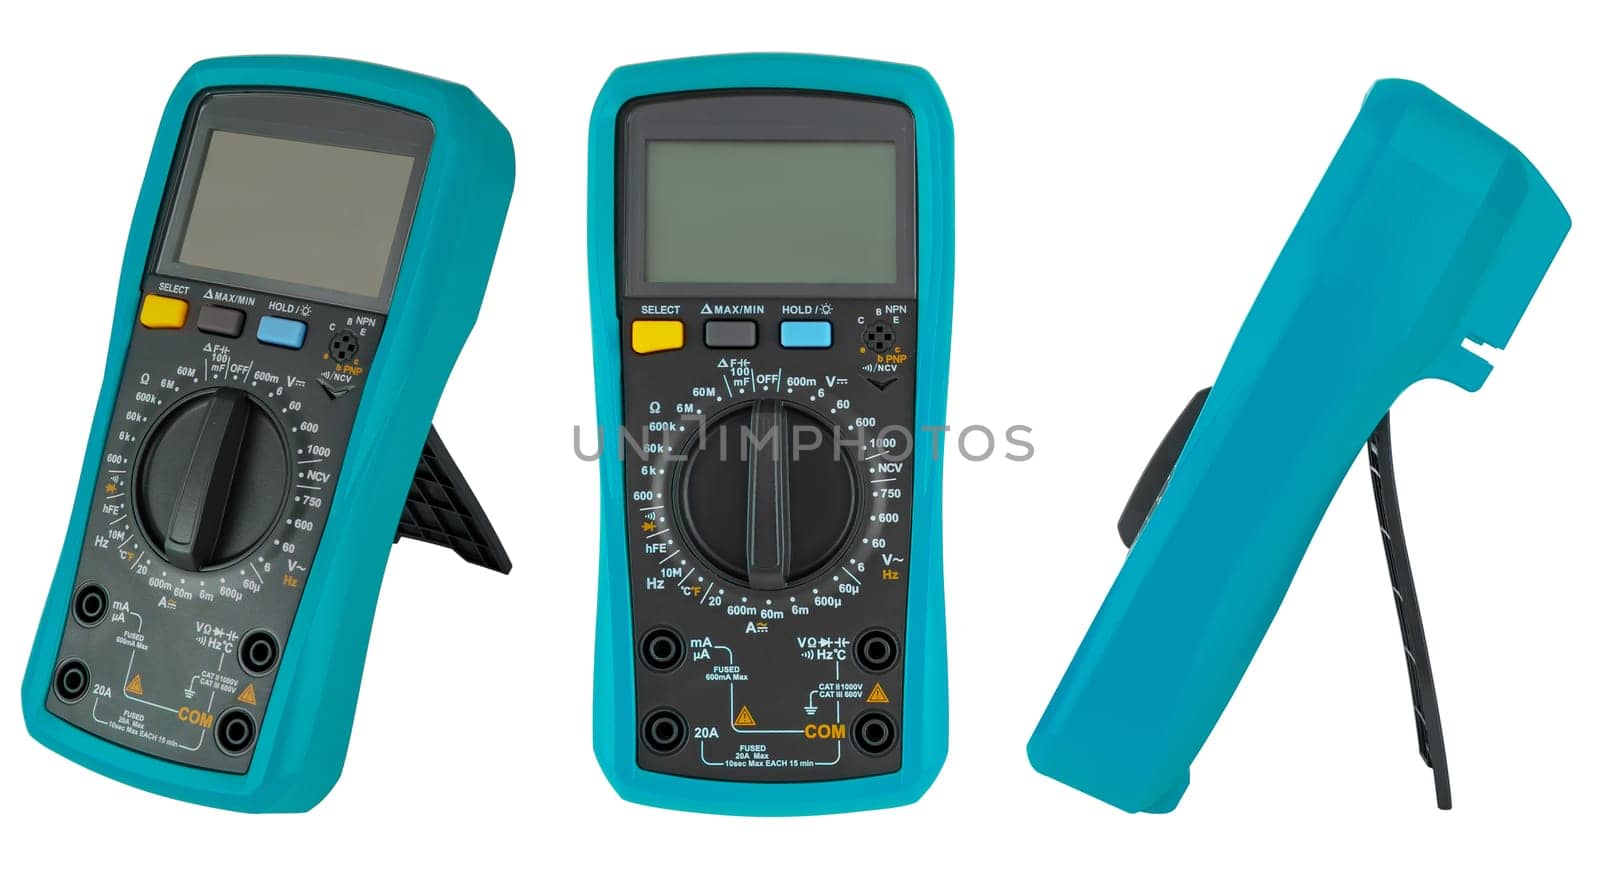 Multimeters, measuring instrument on white background in insulation